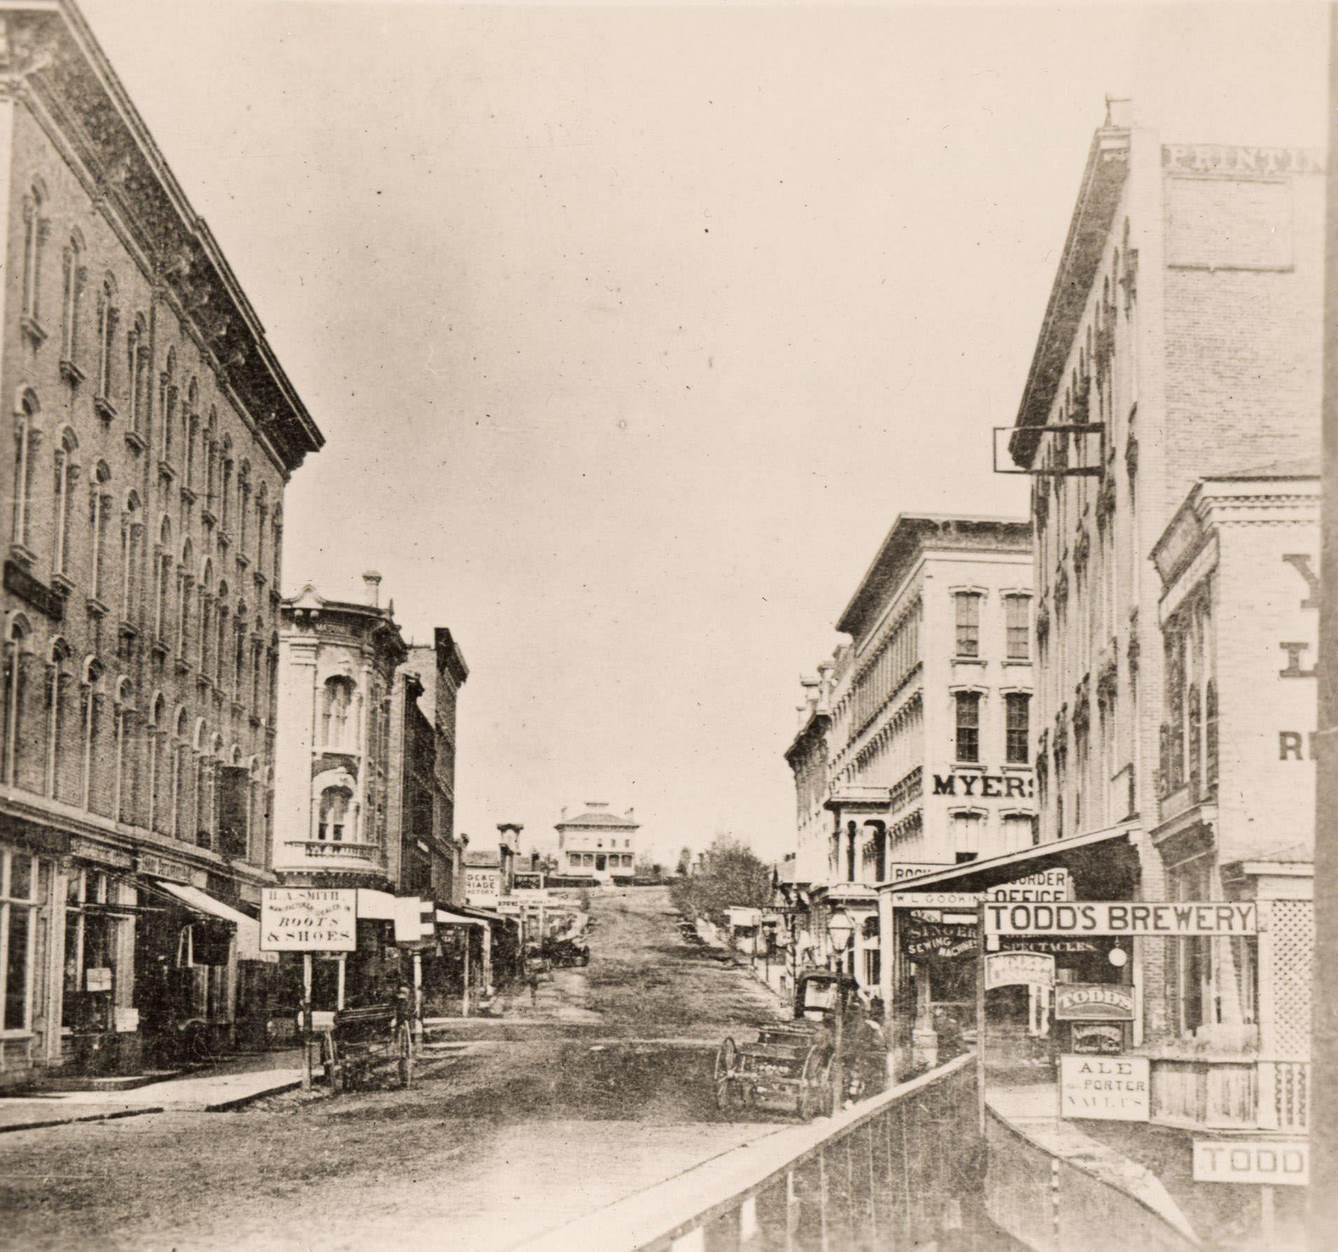 Milwaukee Street looking east in Janesville, Janesville, Wisconsin, 1870. The Myers House is located at the top of the hill.